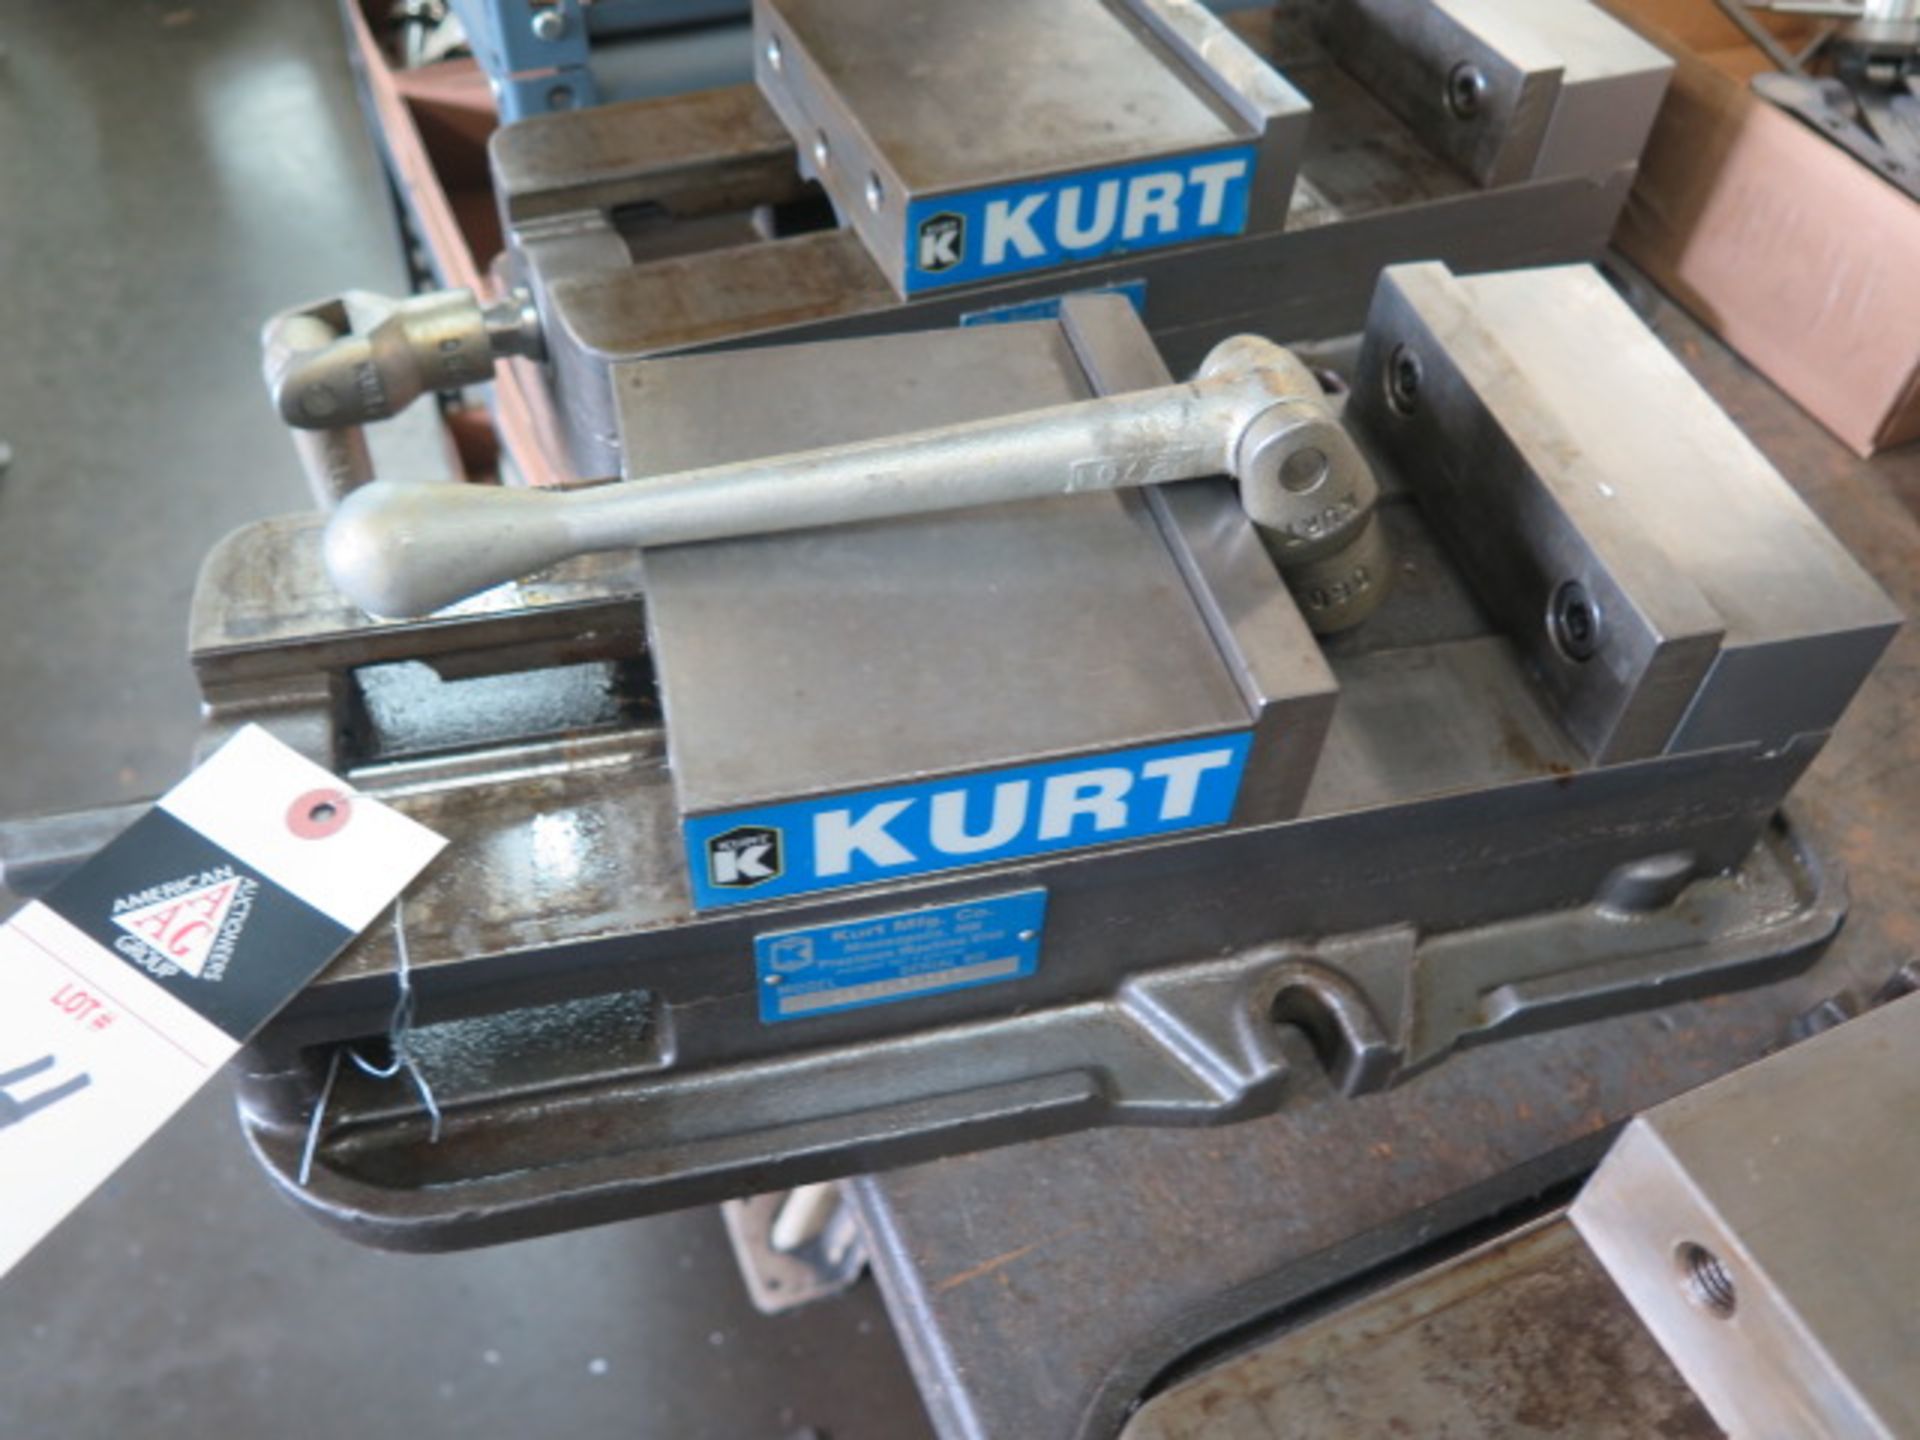 Kurt Matched Set mdl. D675 6" Angle-Lock Vises (2 - Consecutive Serial Numbers) - Image 2 of 5